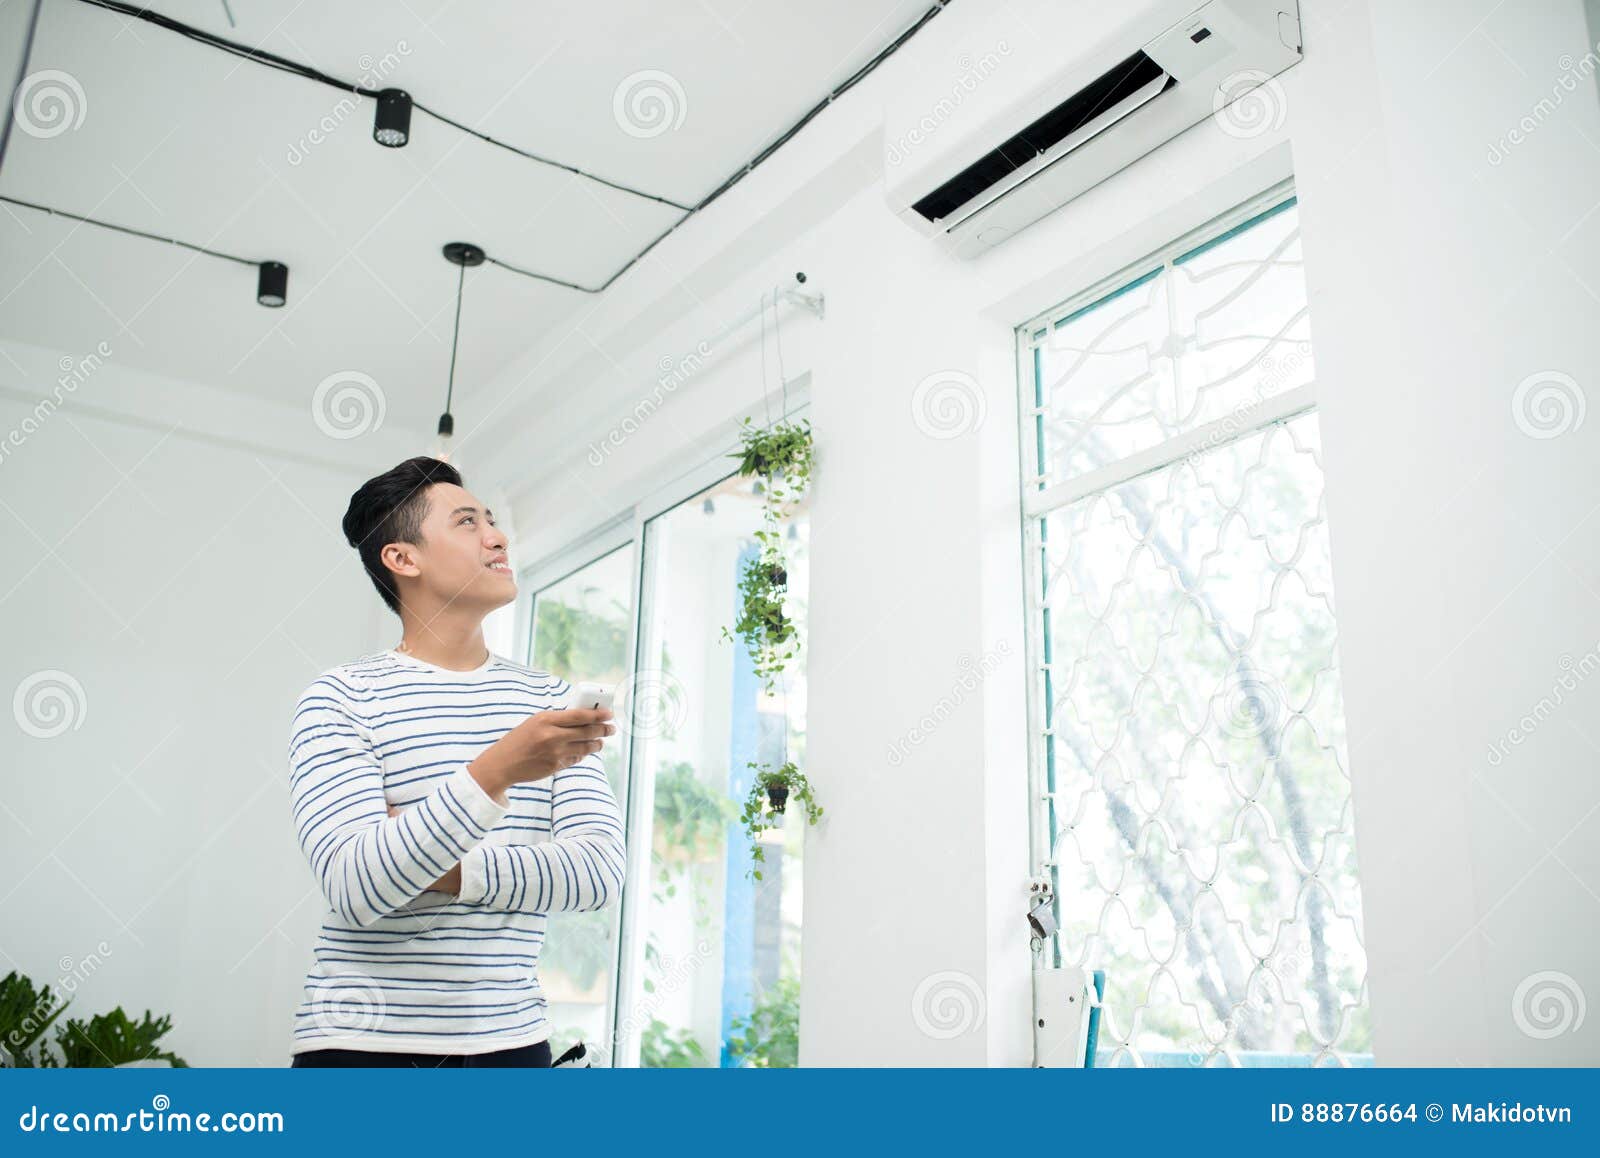 asian man is turning air condition by remote control and smiling